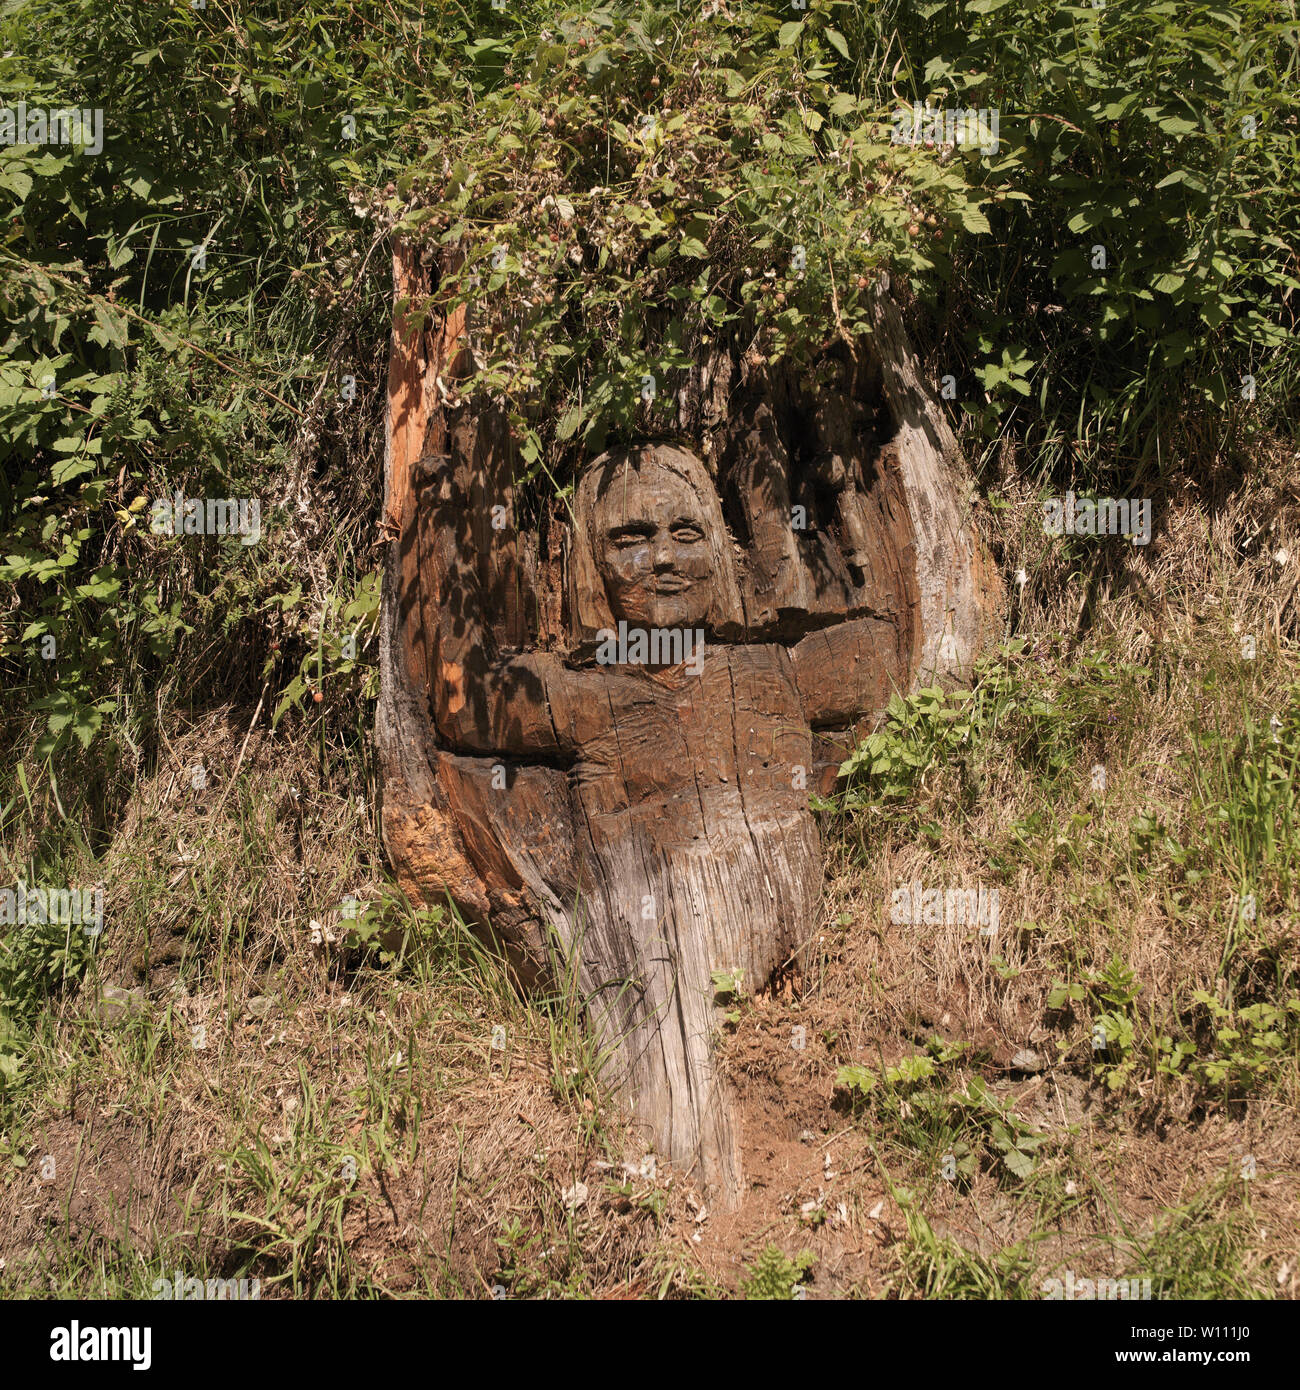 Ayas, Aosta Valley, Italy - August 10, 2006: Tree trunk carved along a mountain path. Stock Photo